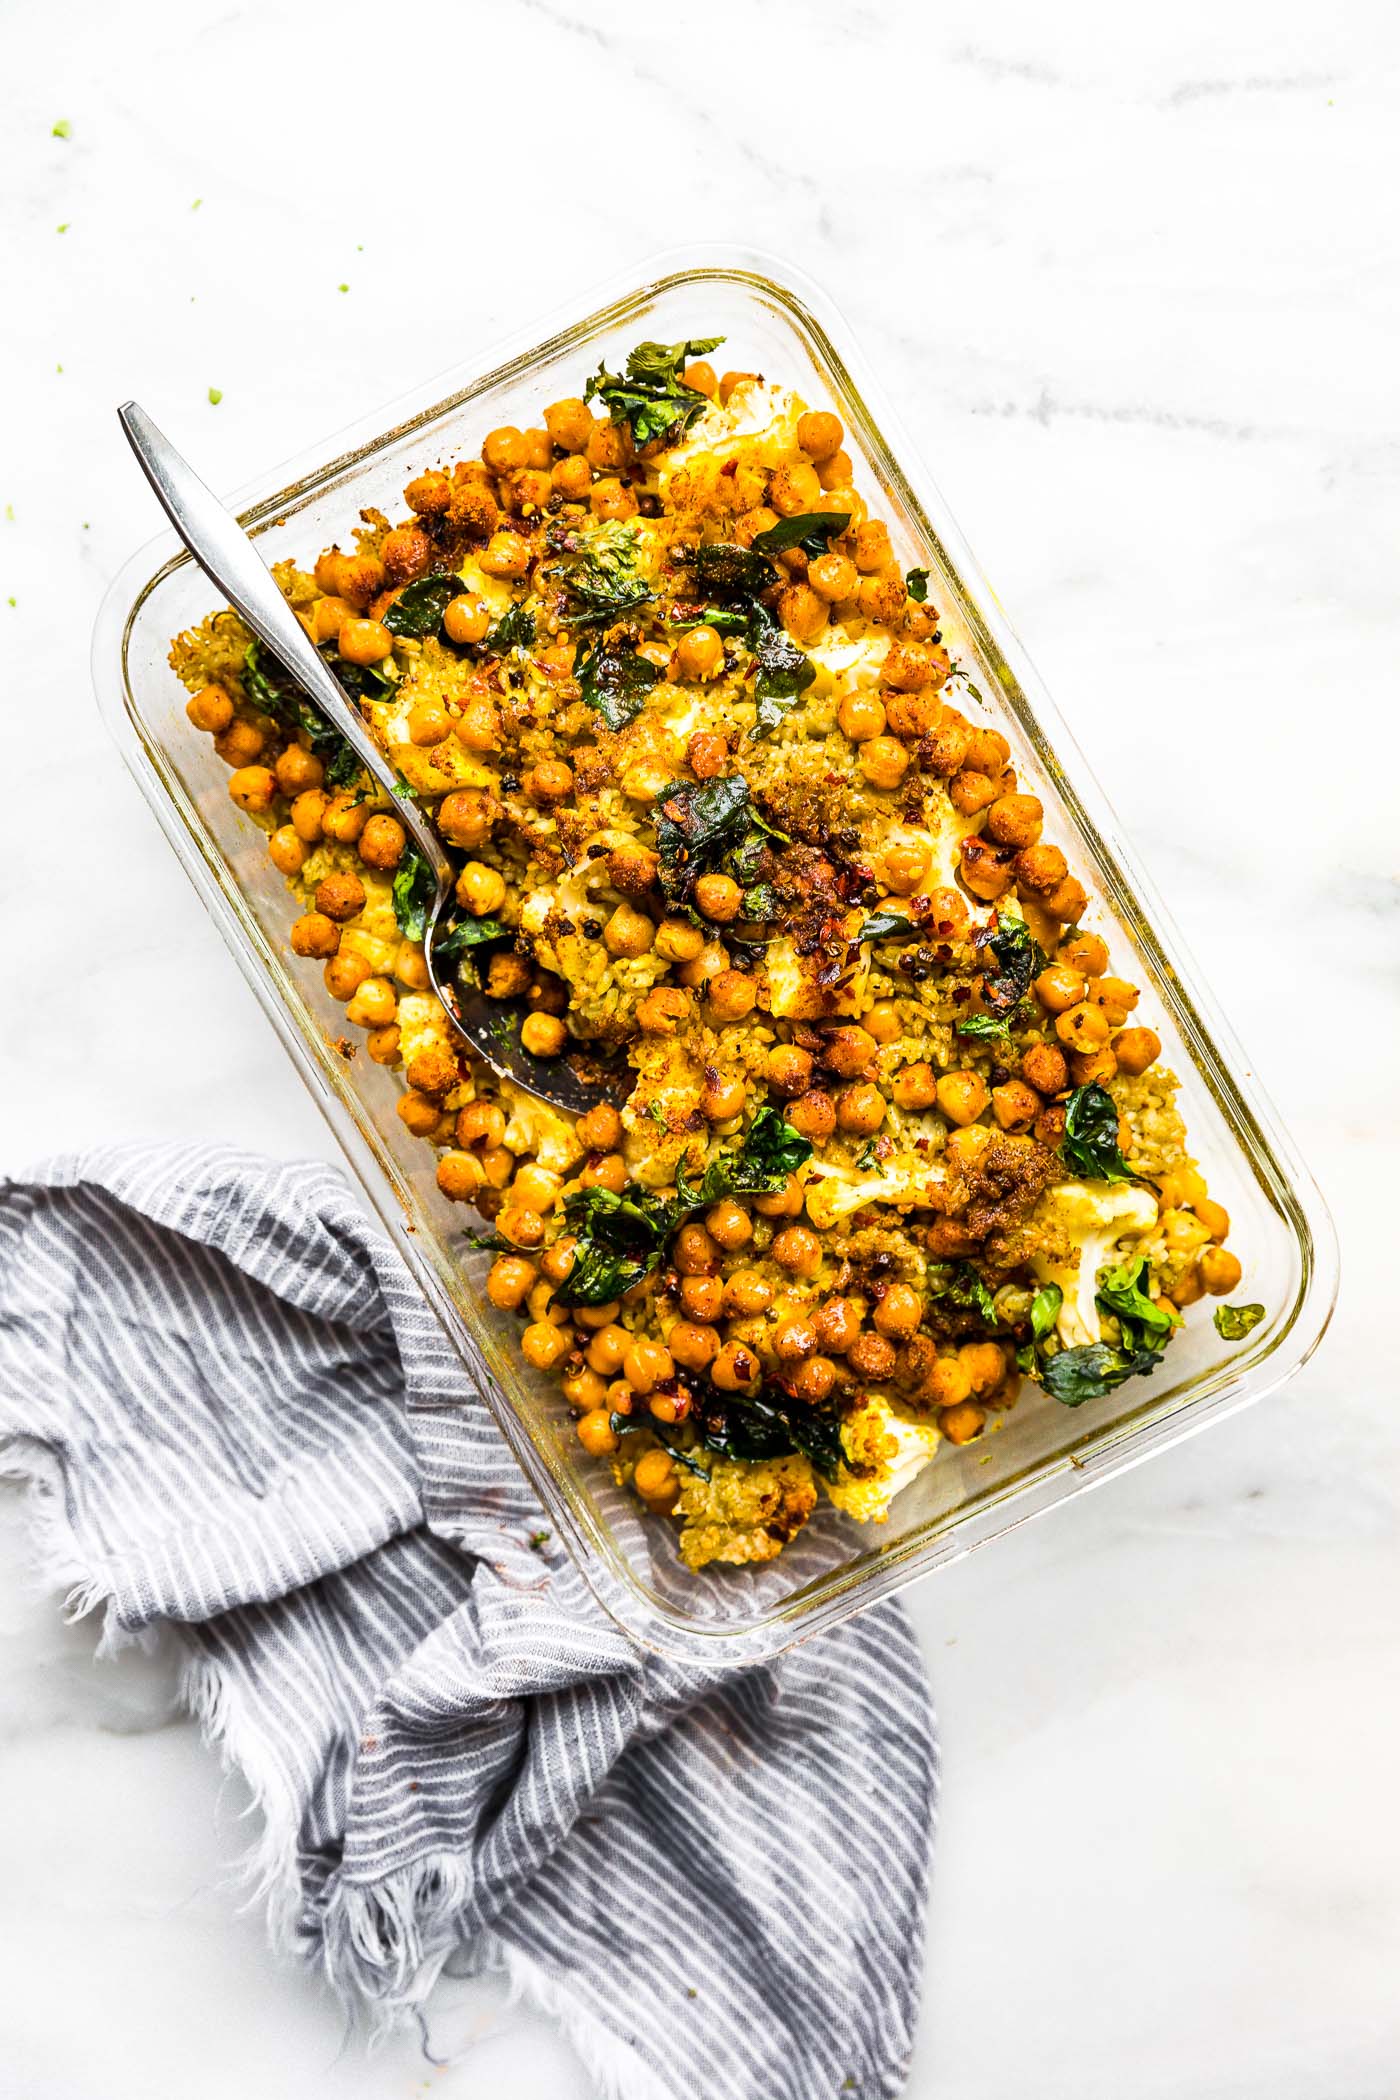 Curried Cauliflower and Chickpea Bake in clear glass baking dish with spoon in casserole.